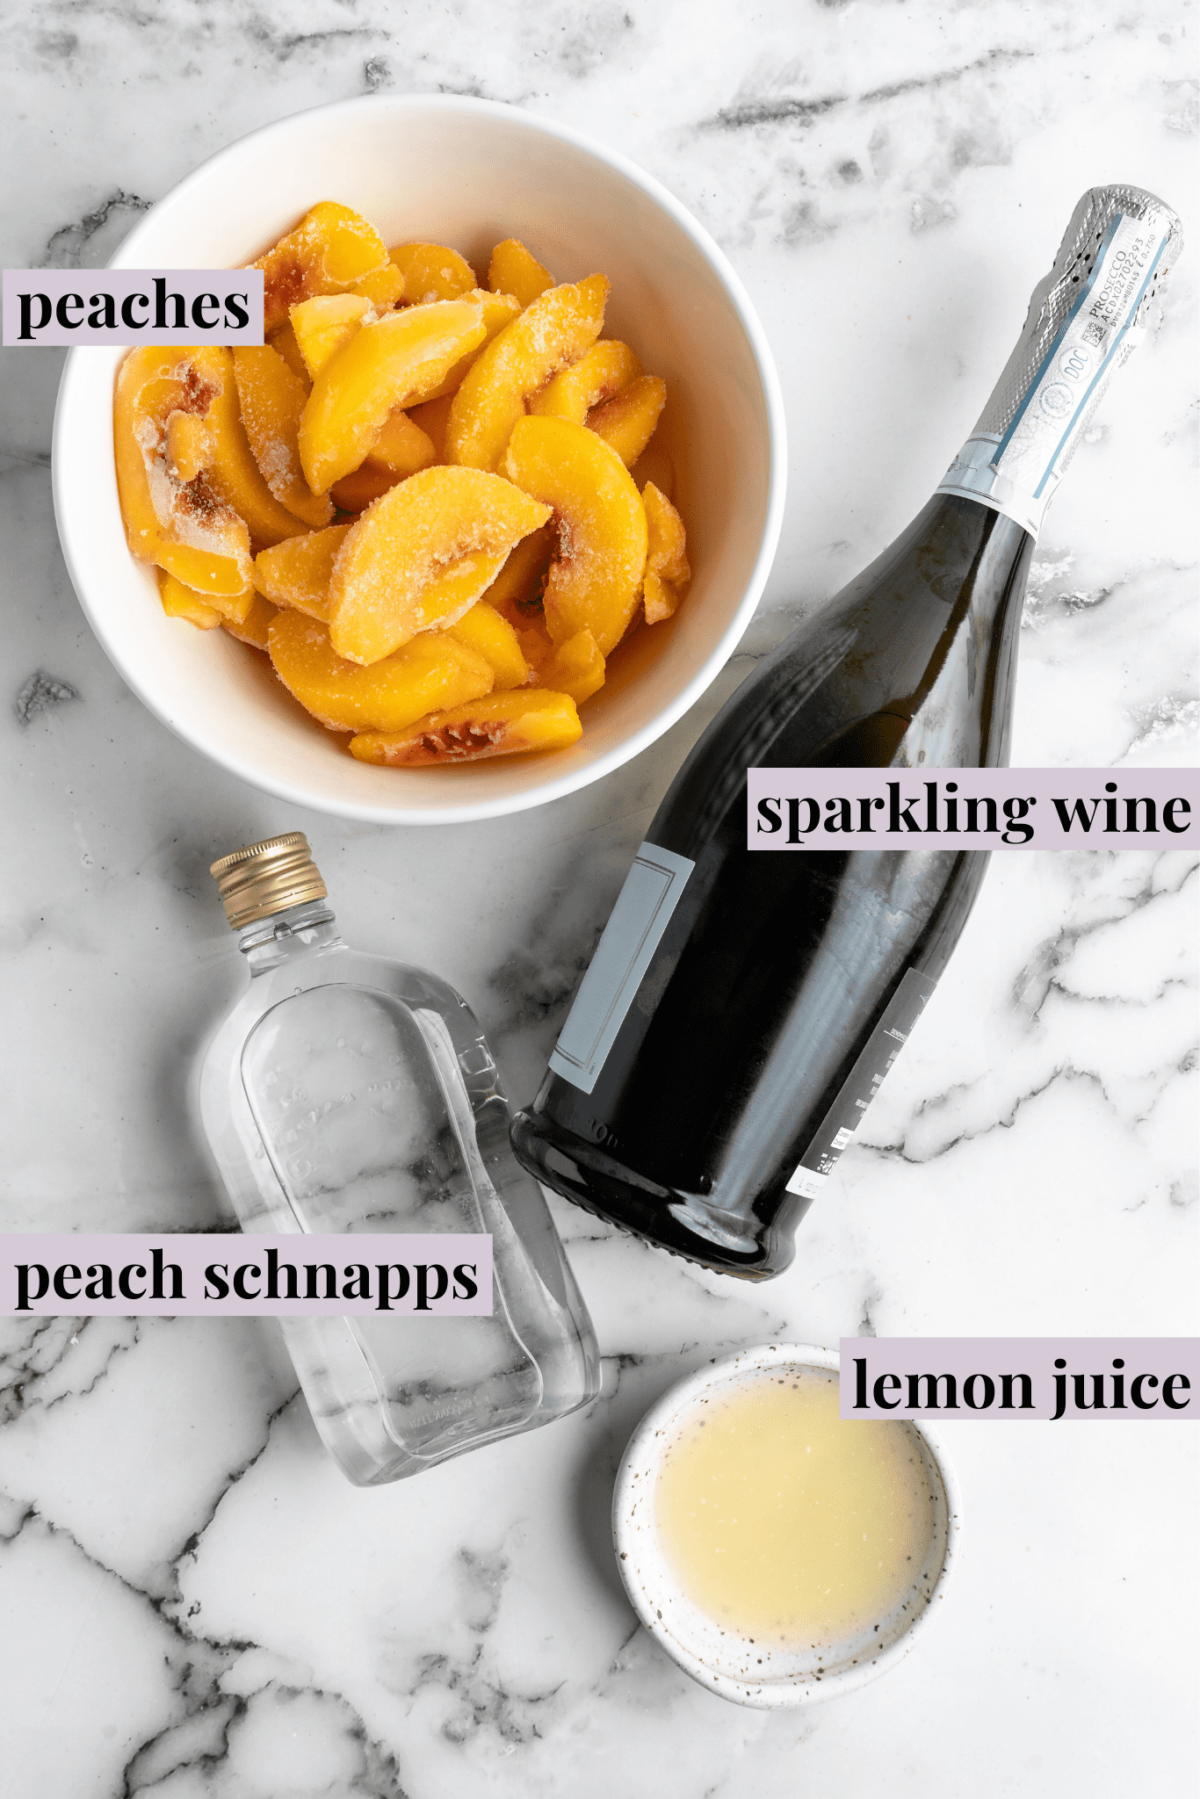 Overhead view of the labeled ingredients for peach bellinis: a bowl of peach slices, a bowl of lemon juice, a bottle of sparkling wine, and a bottle of peach schnapps